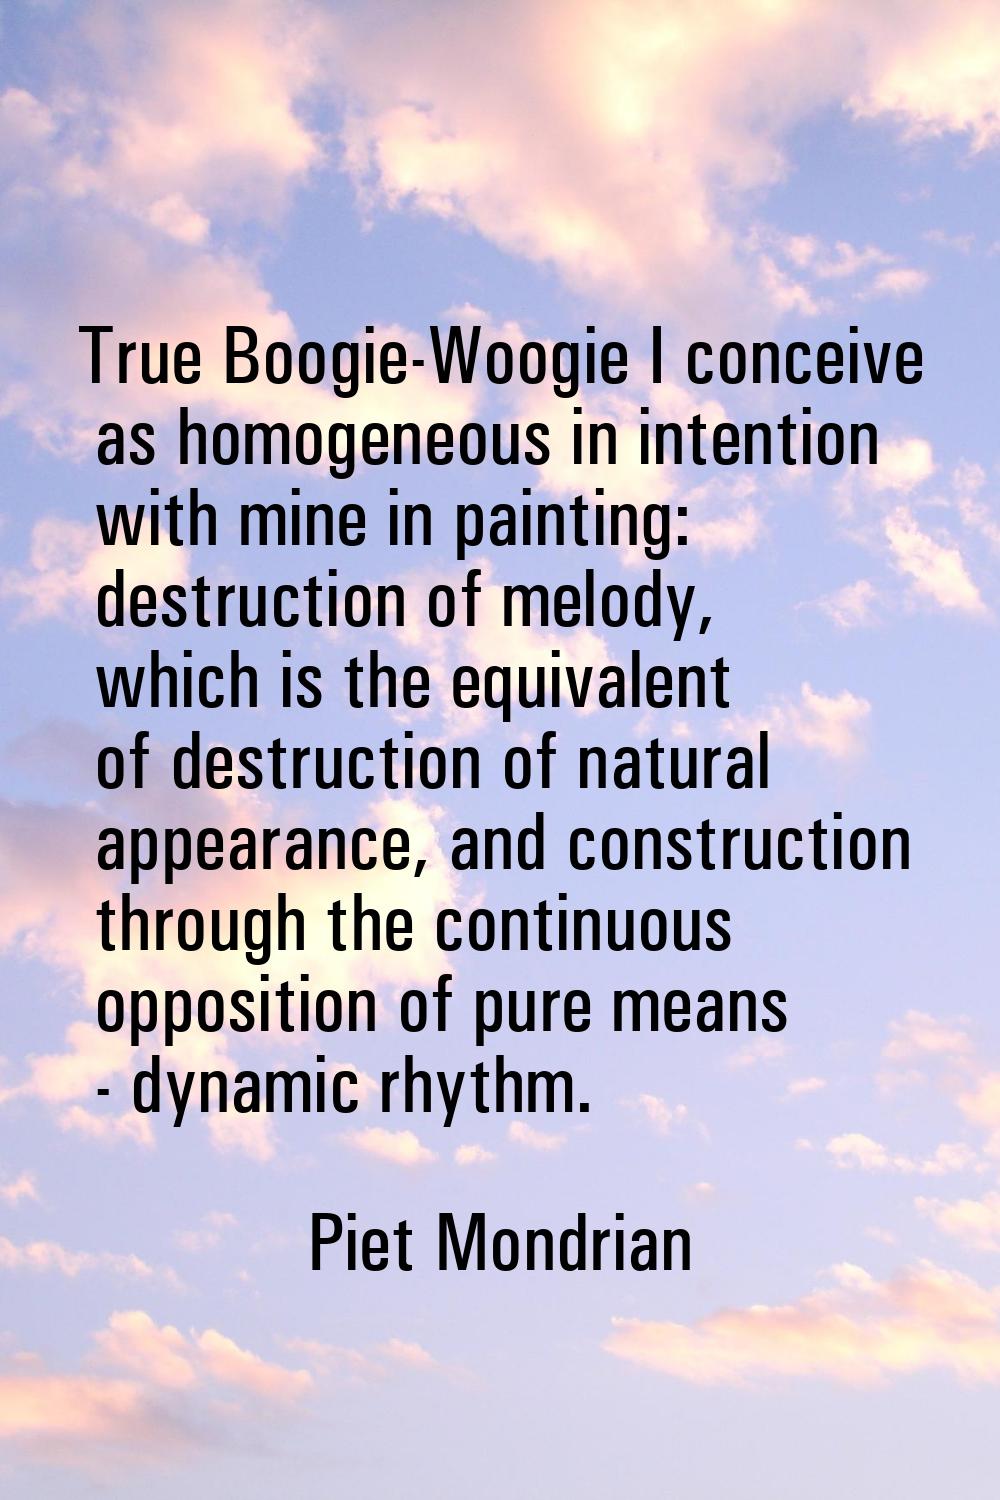 True Boogie-Woogie I conceive as homogeneous in intention with mine in painting: destruction of mel